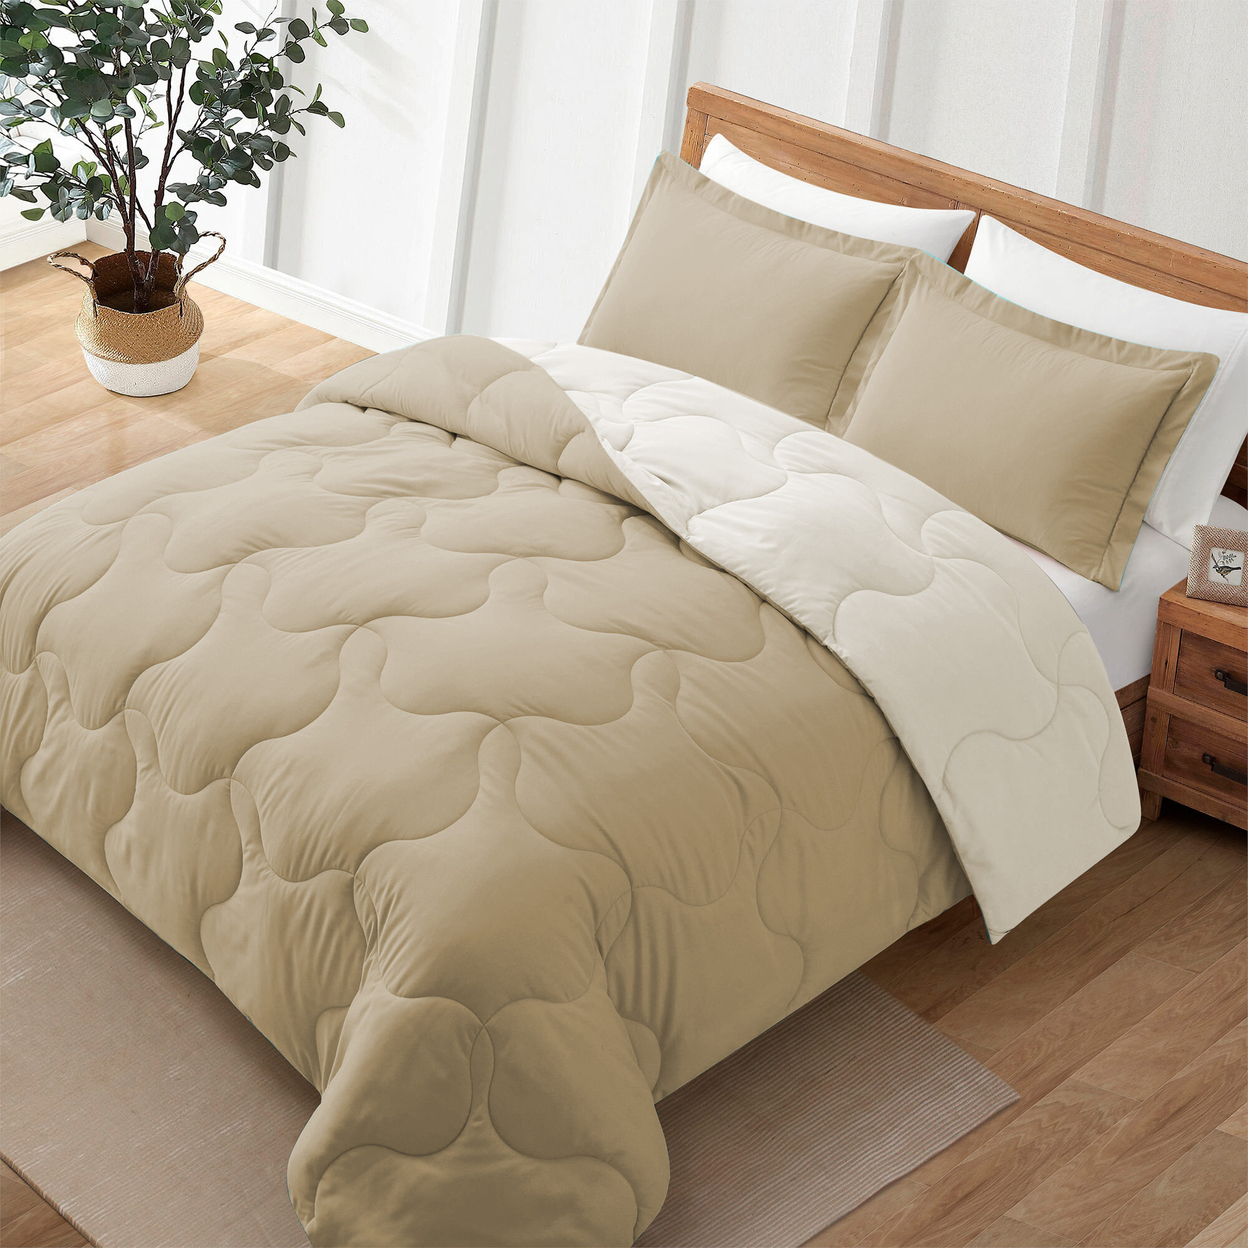 3 Or 2 Pieces Lightweight Reversible Comforter Set With Pillow Shams - Khaki/Ivory, Full/Queen